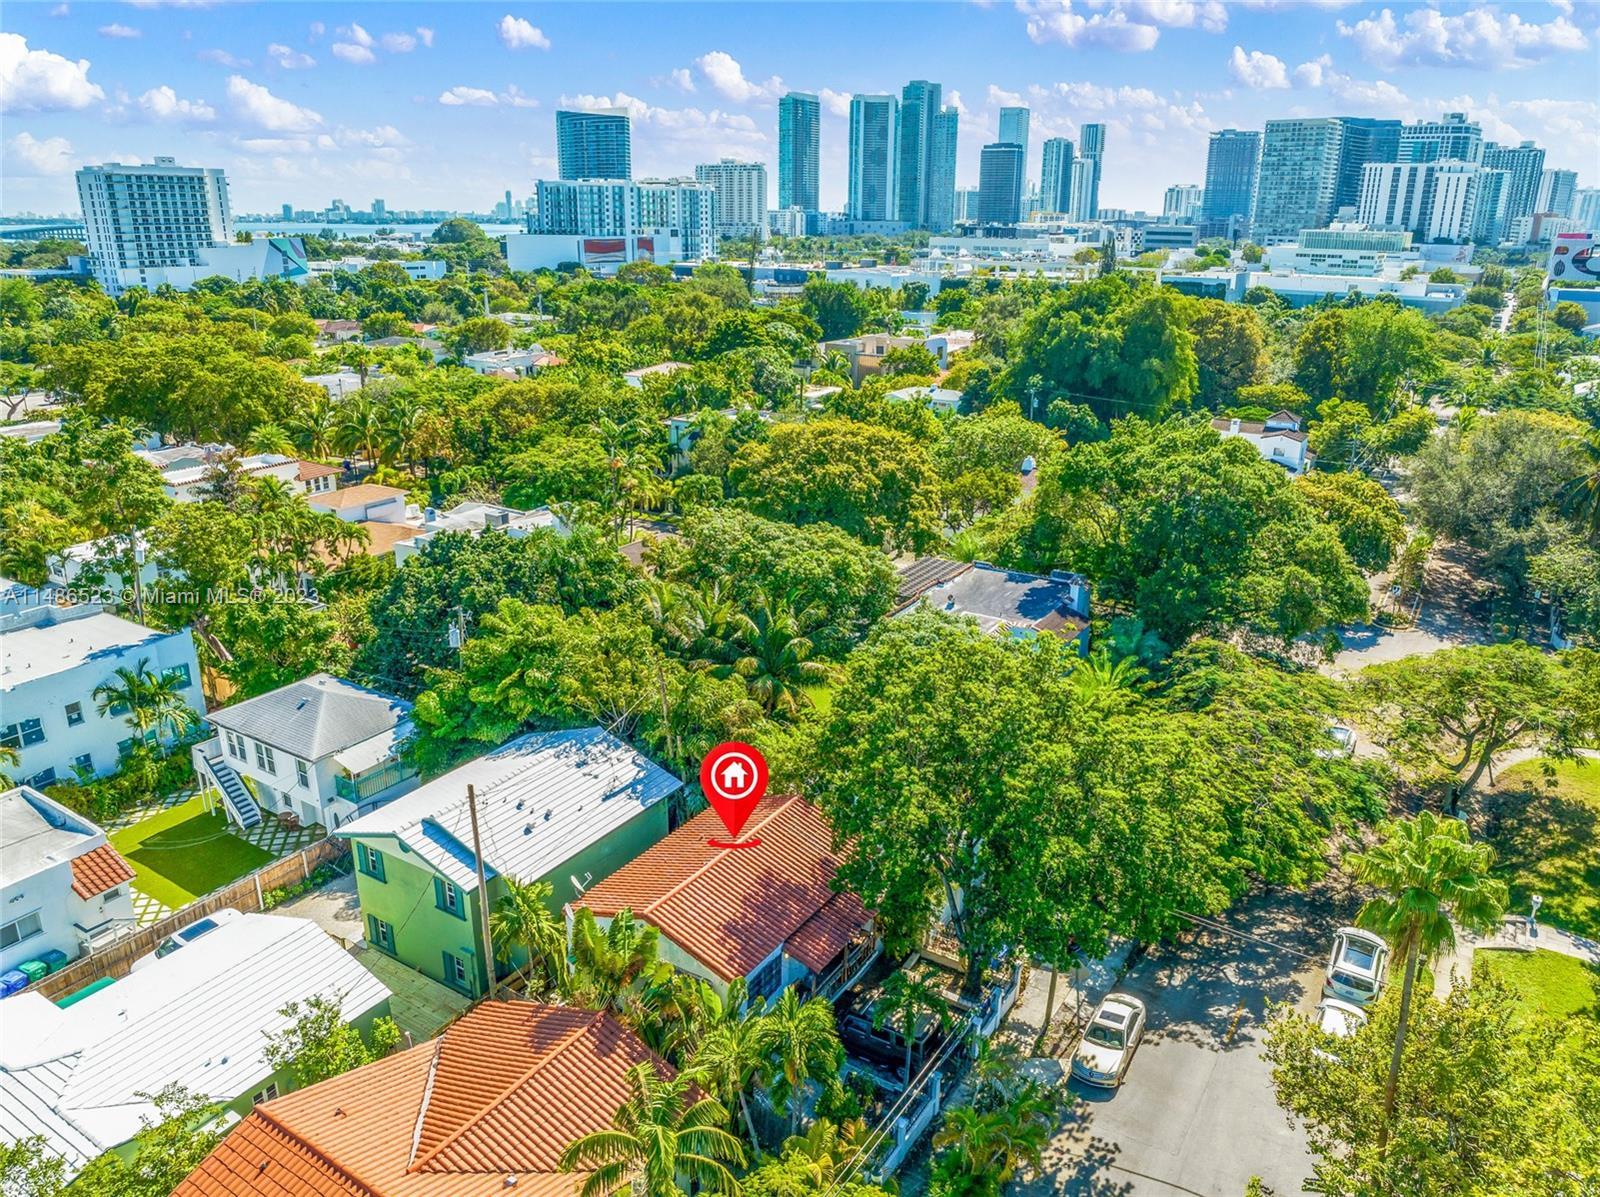 Location Location Location! Just 3 blocks away from Design District shops and amazing restaurants, f